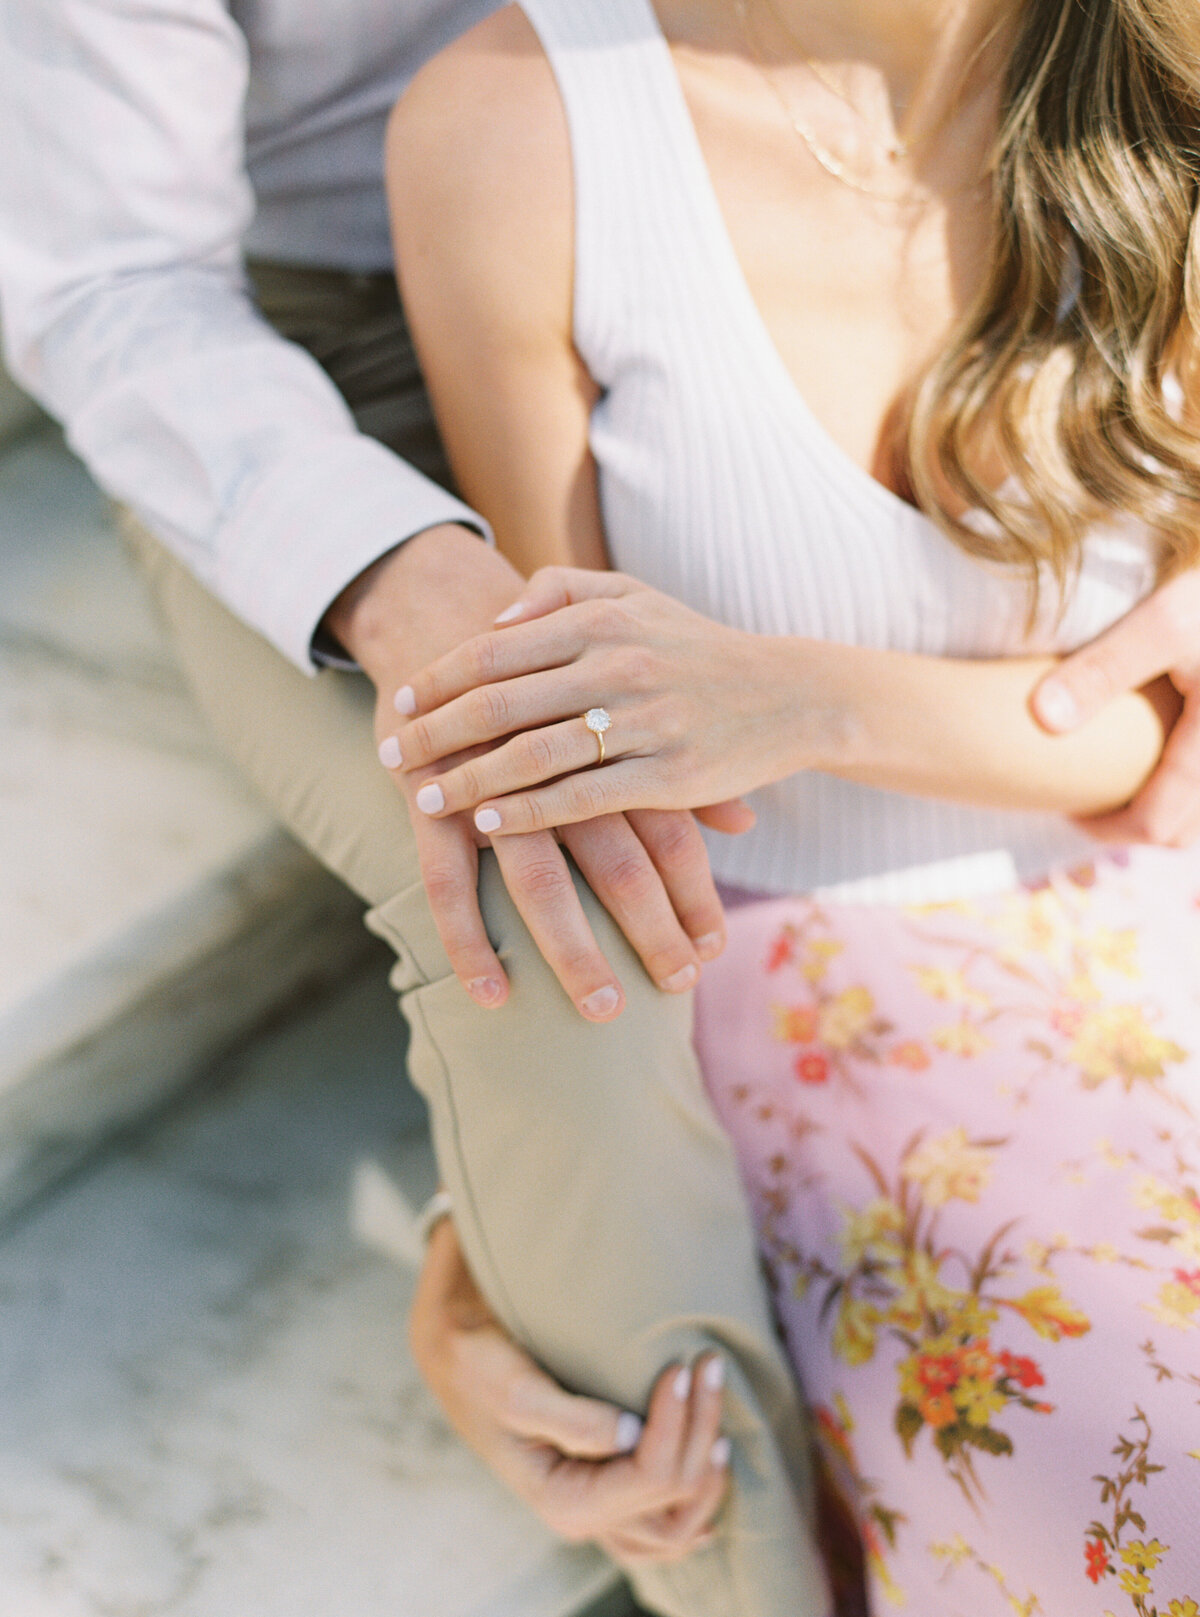 Pink floral skirt. Girl sitting in between legs of guy with engagement ring holding hands. Downtown Charleston spring engagement session. Kailee DiMeglio Photography.